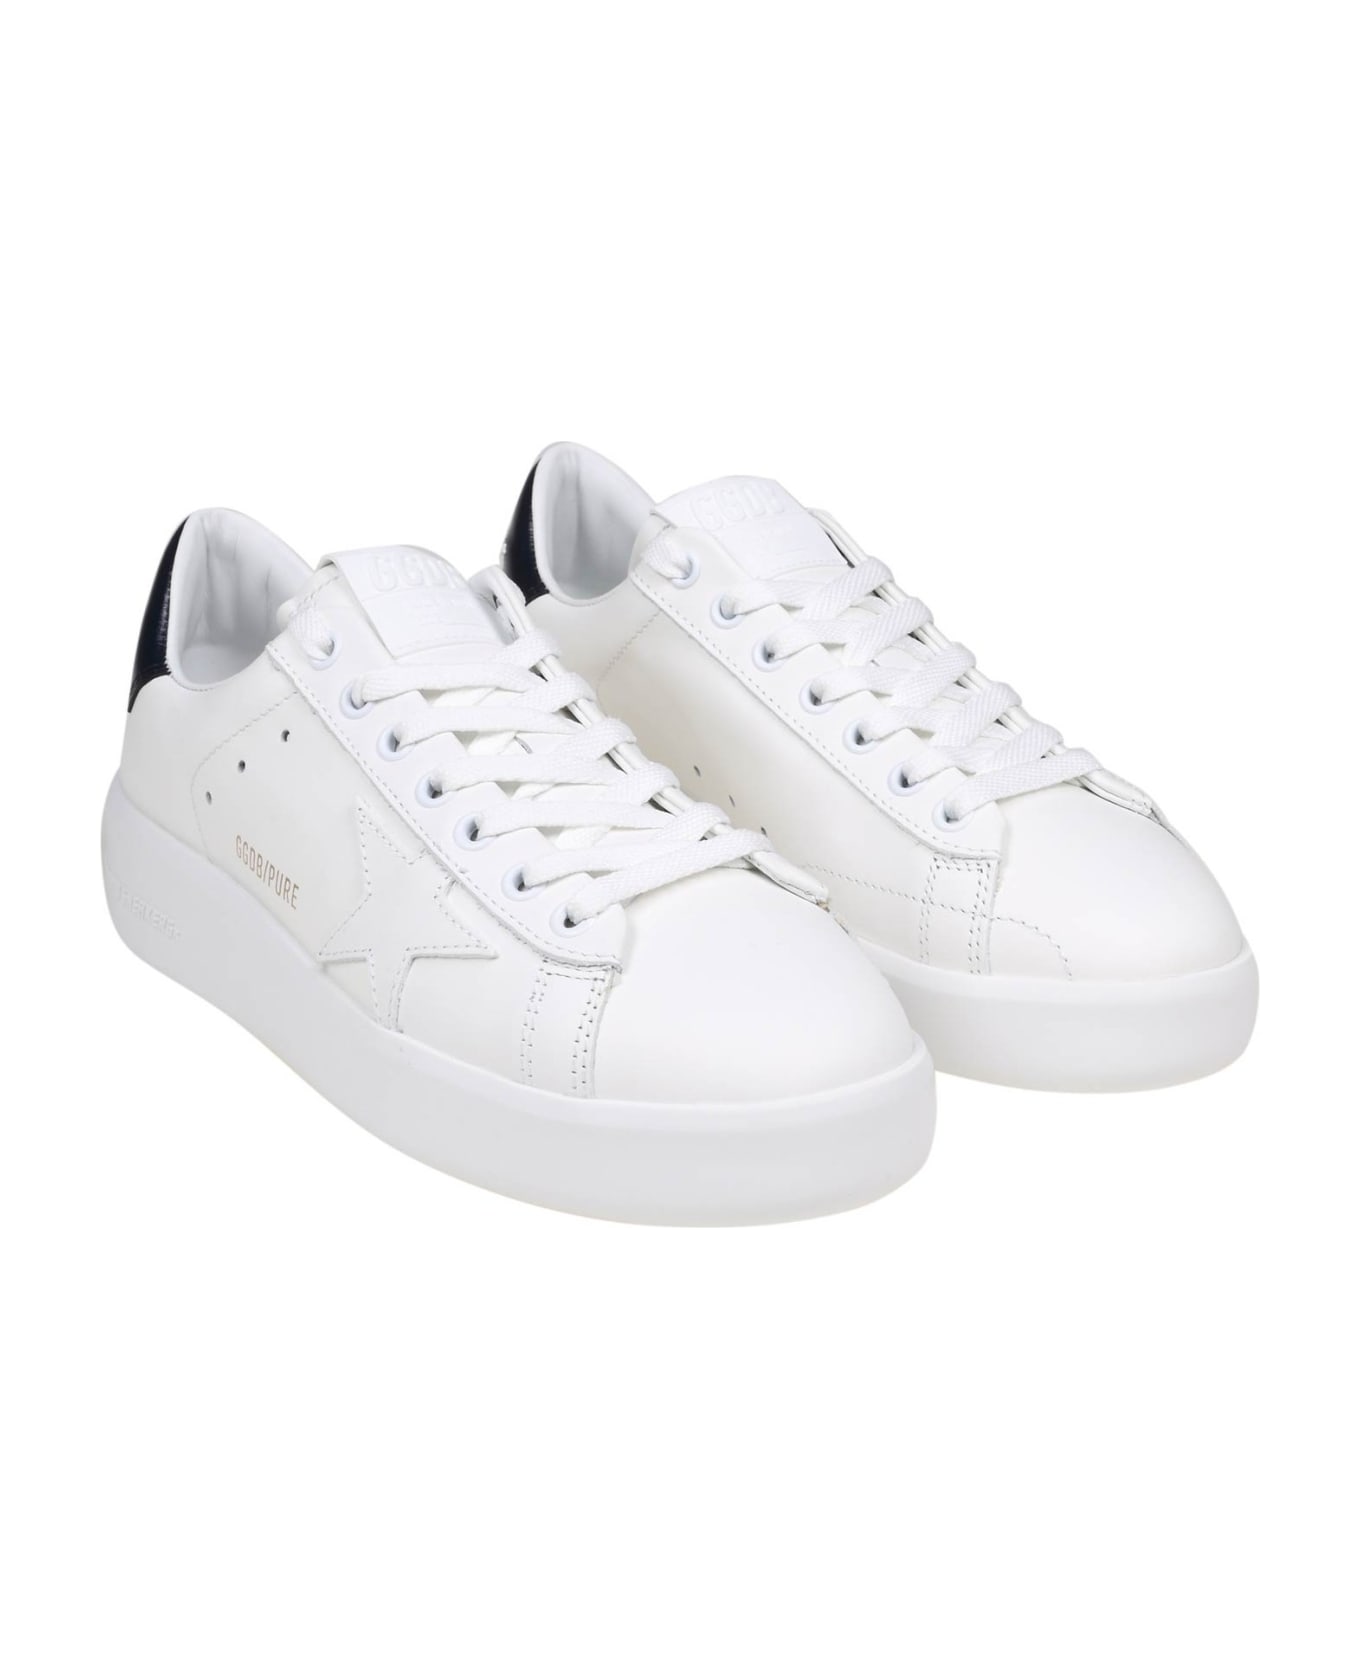 Golden Goose Pure Star Sneakers - White/blue